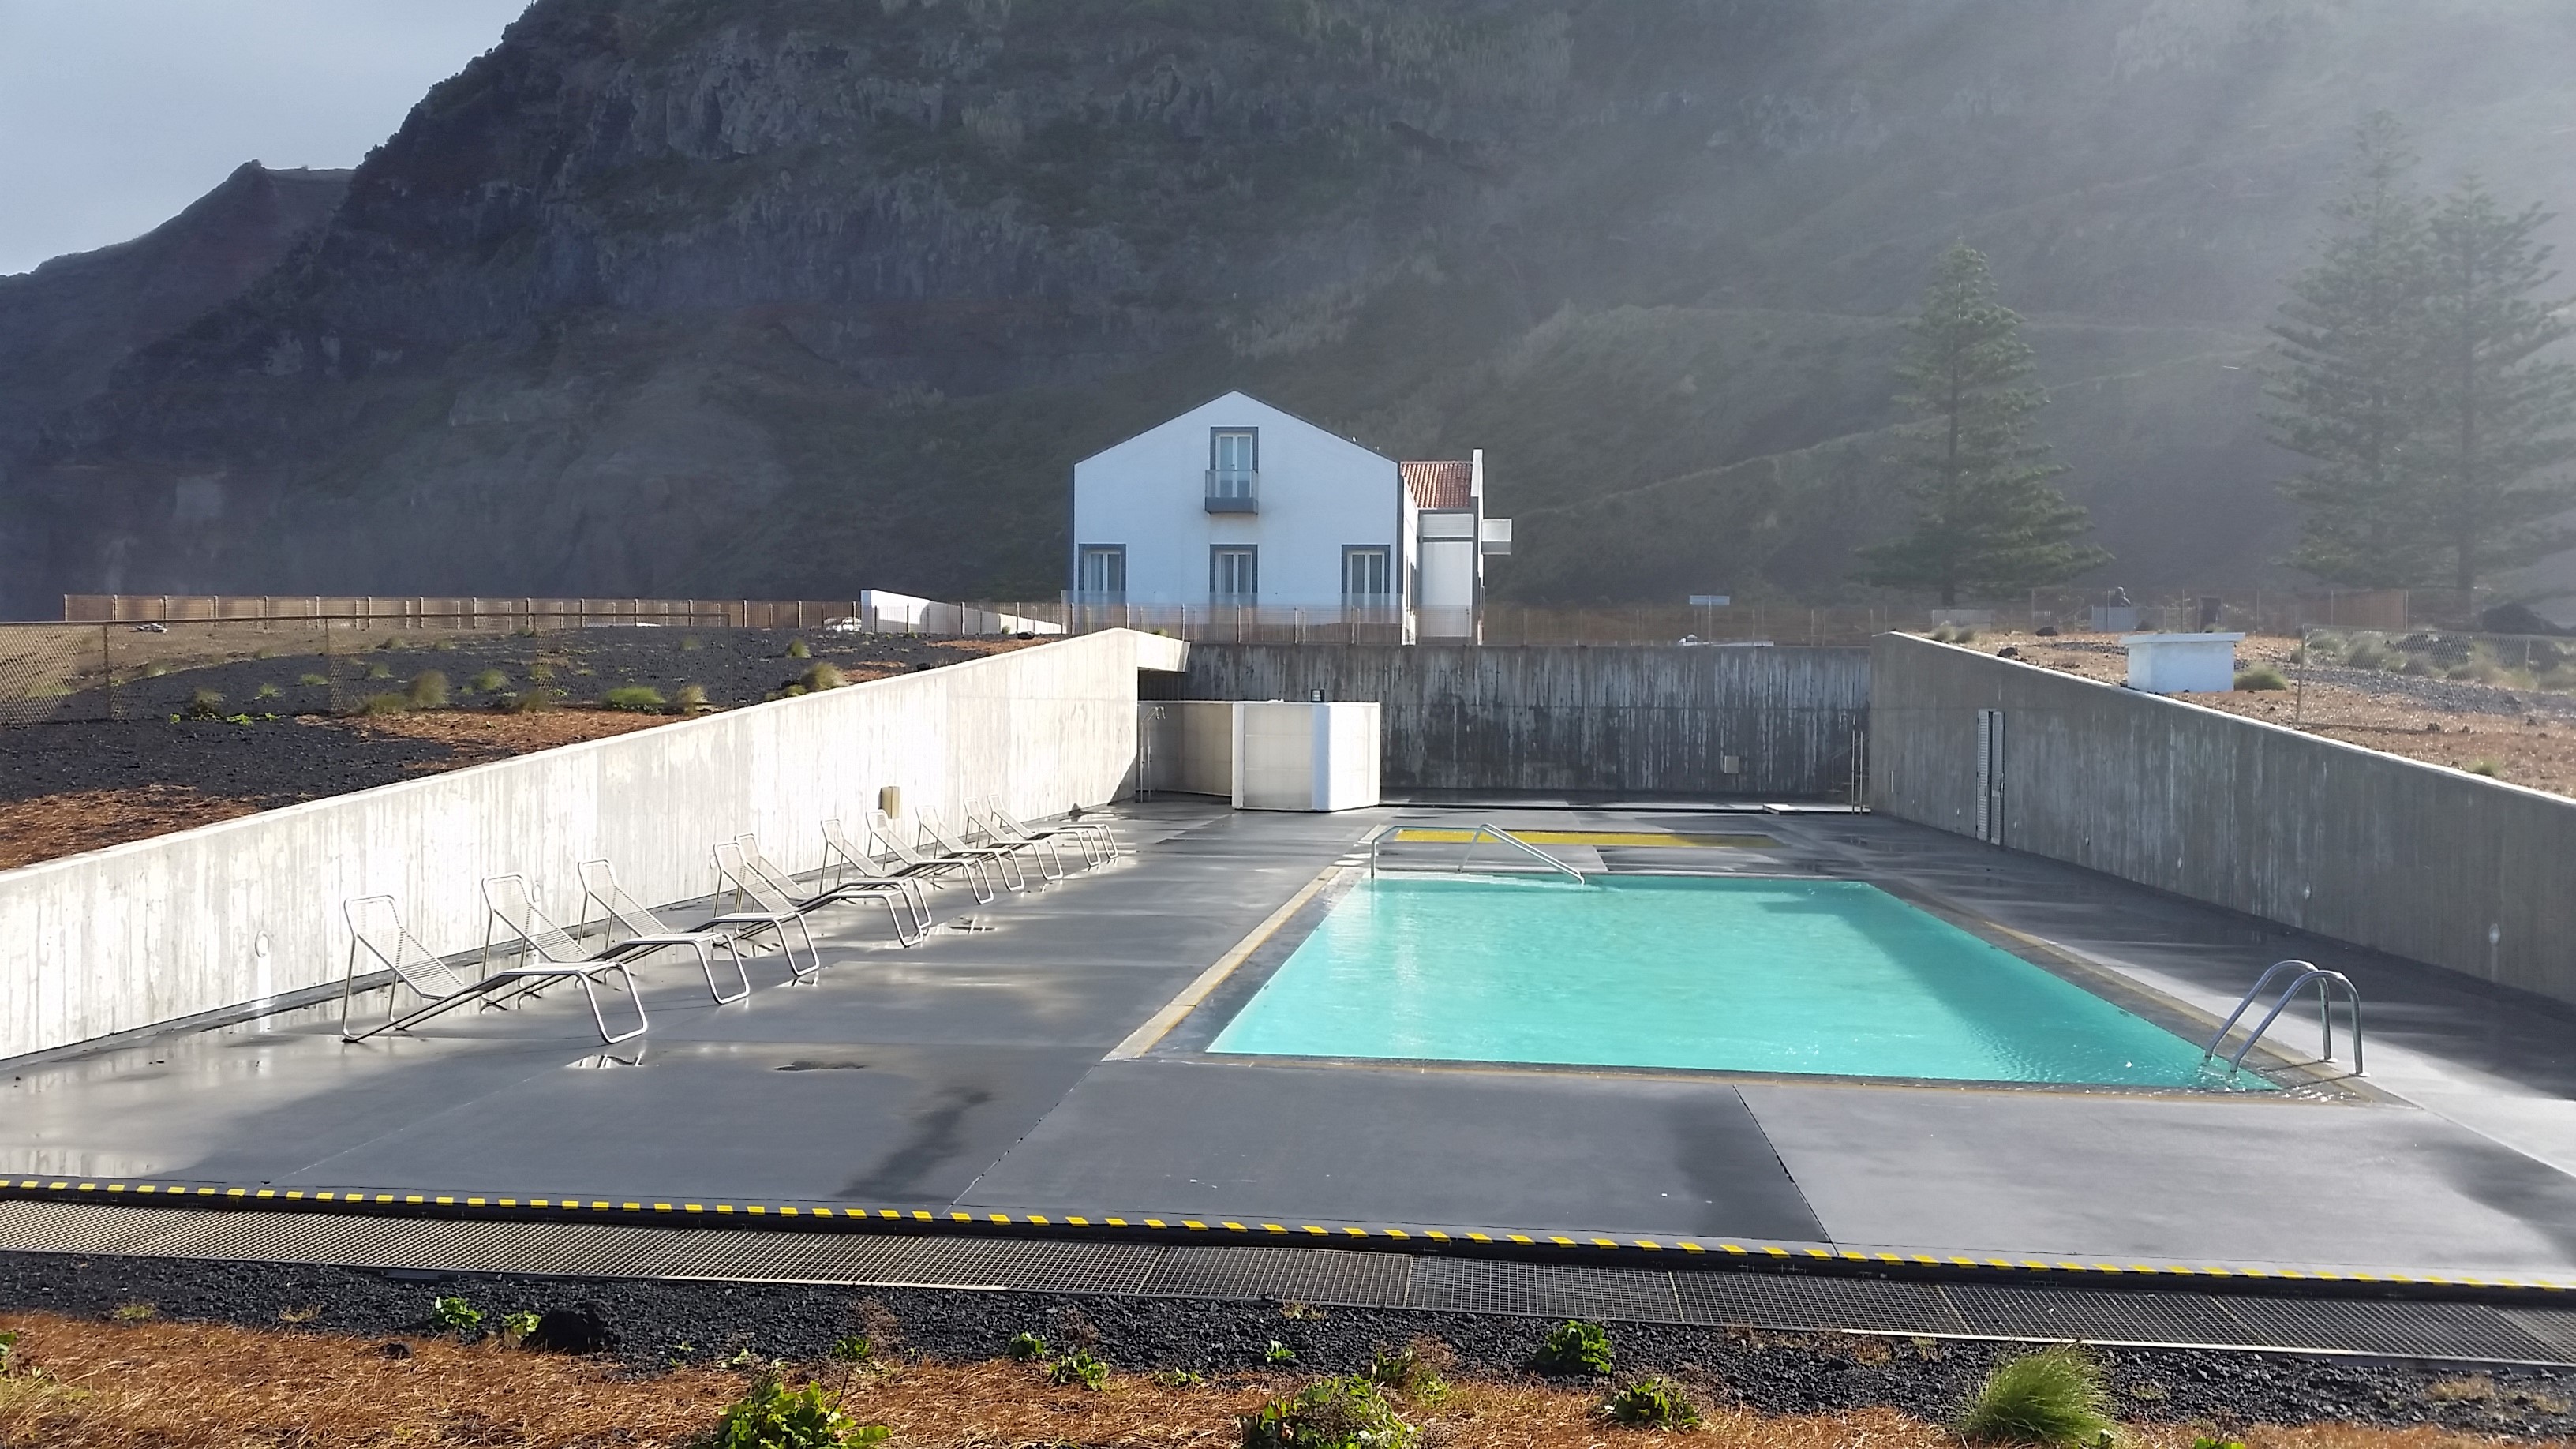 Ferraria Thermal building and pools